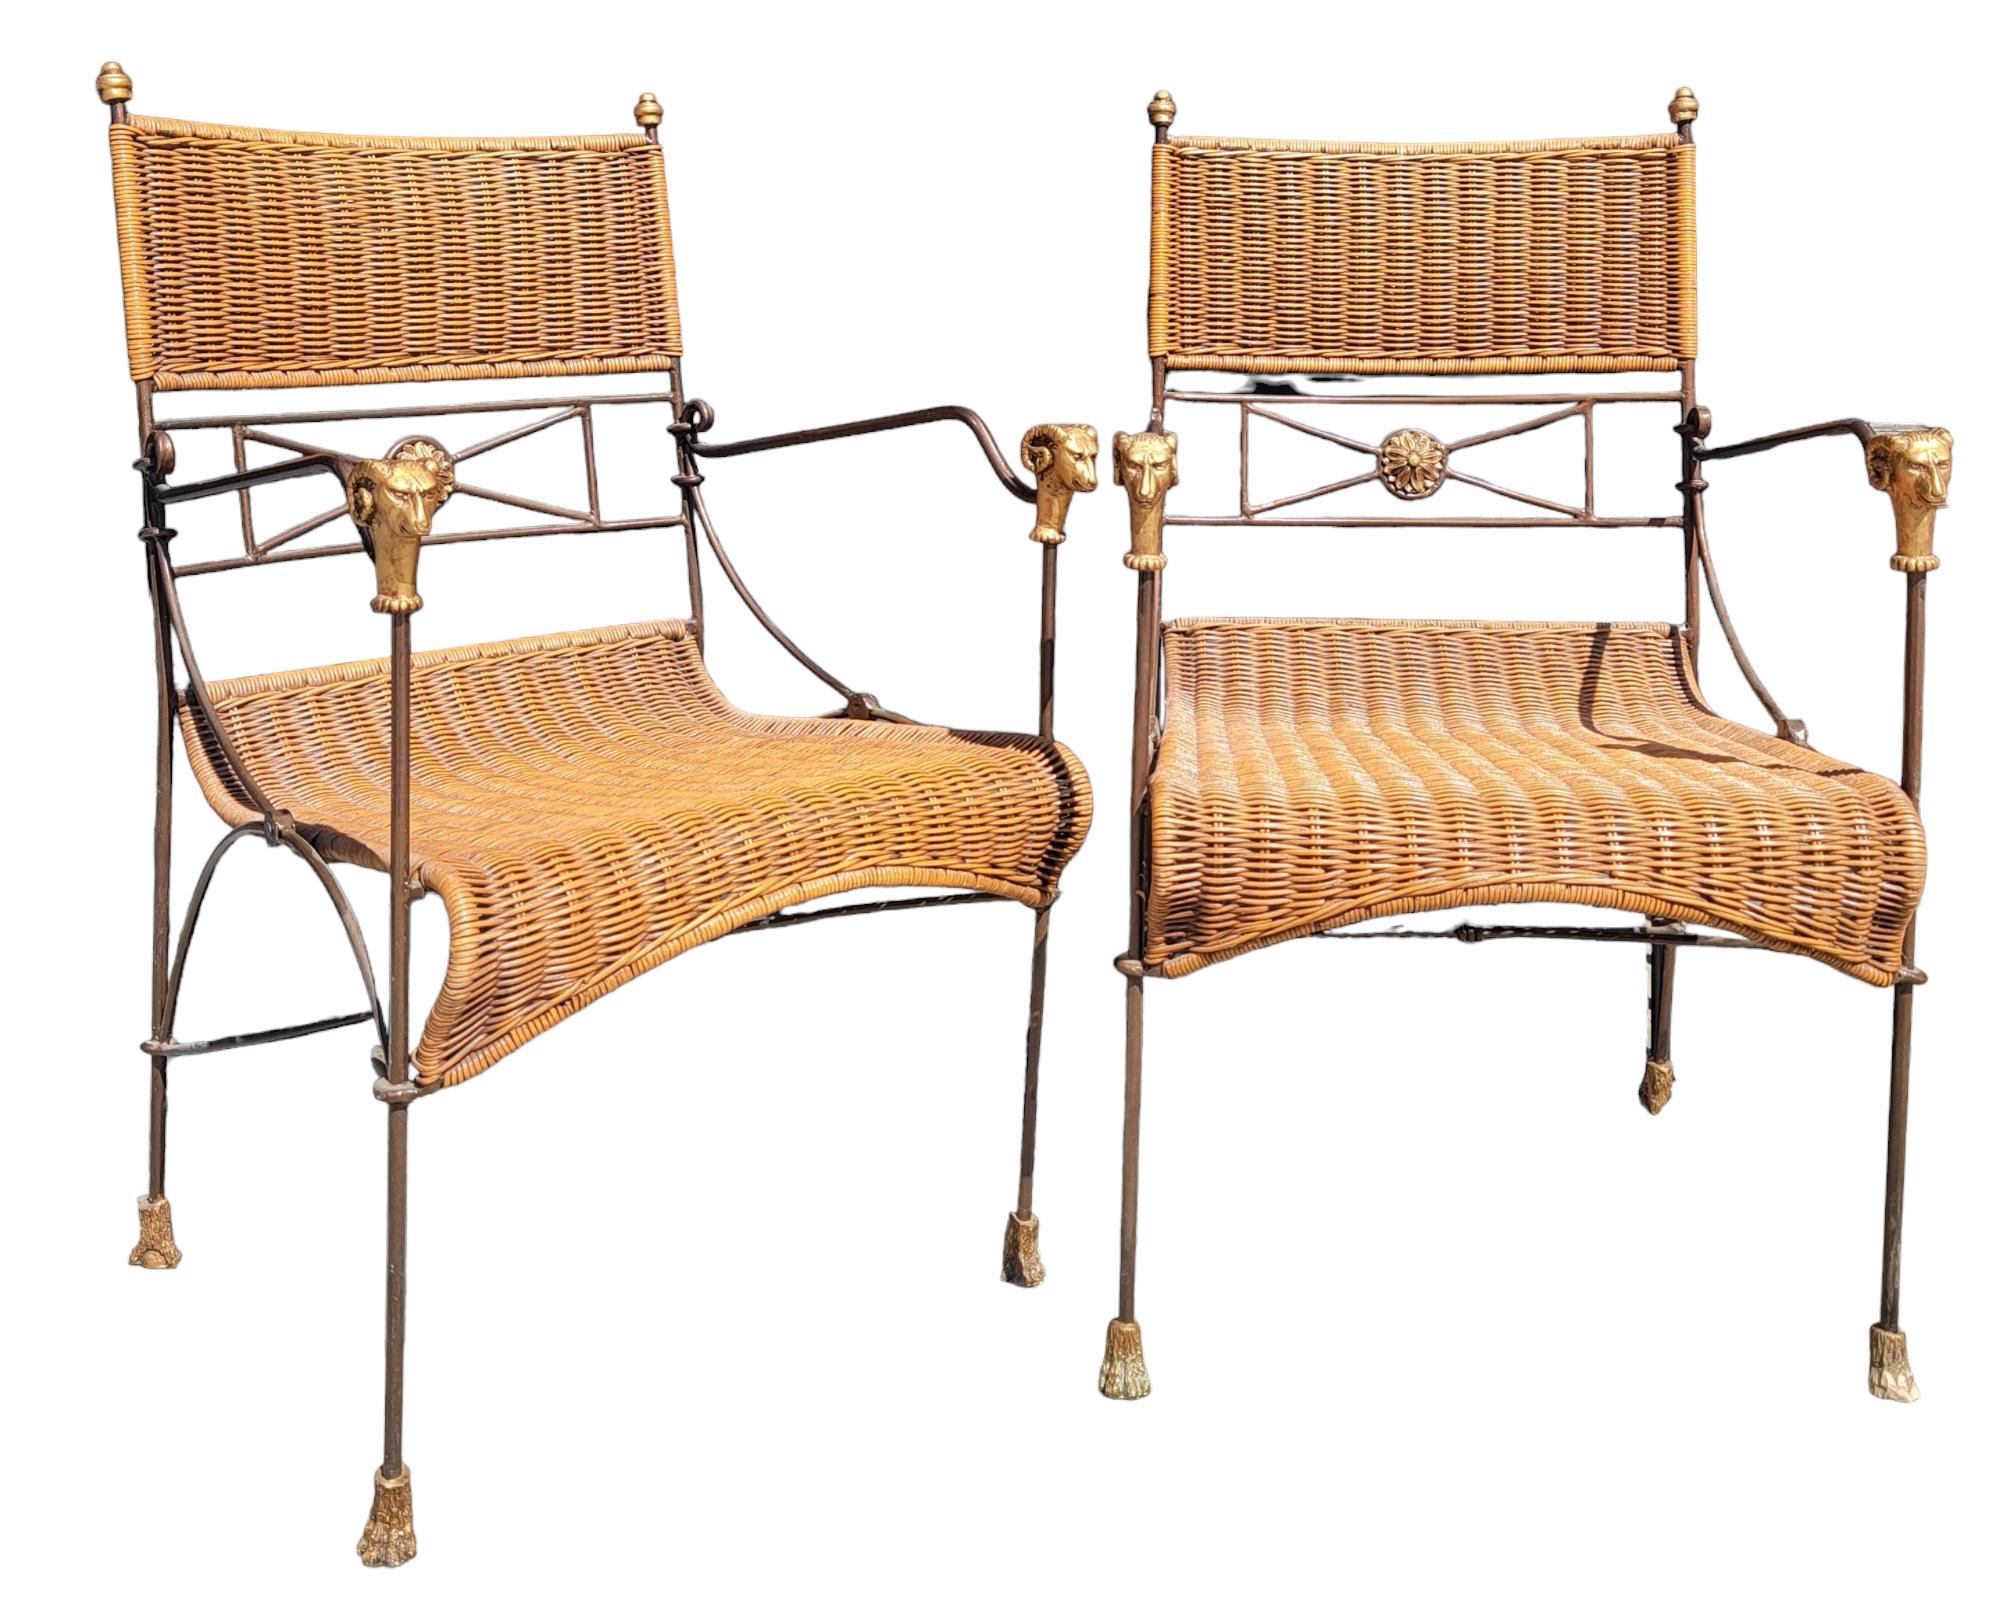 Set of Three Iron And Wicker Settee And Chair By Giacometti  2